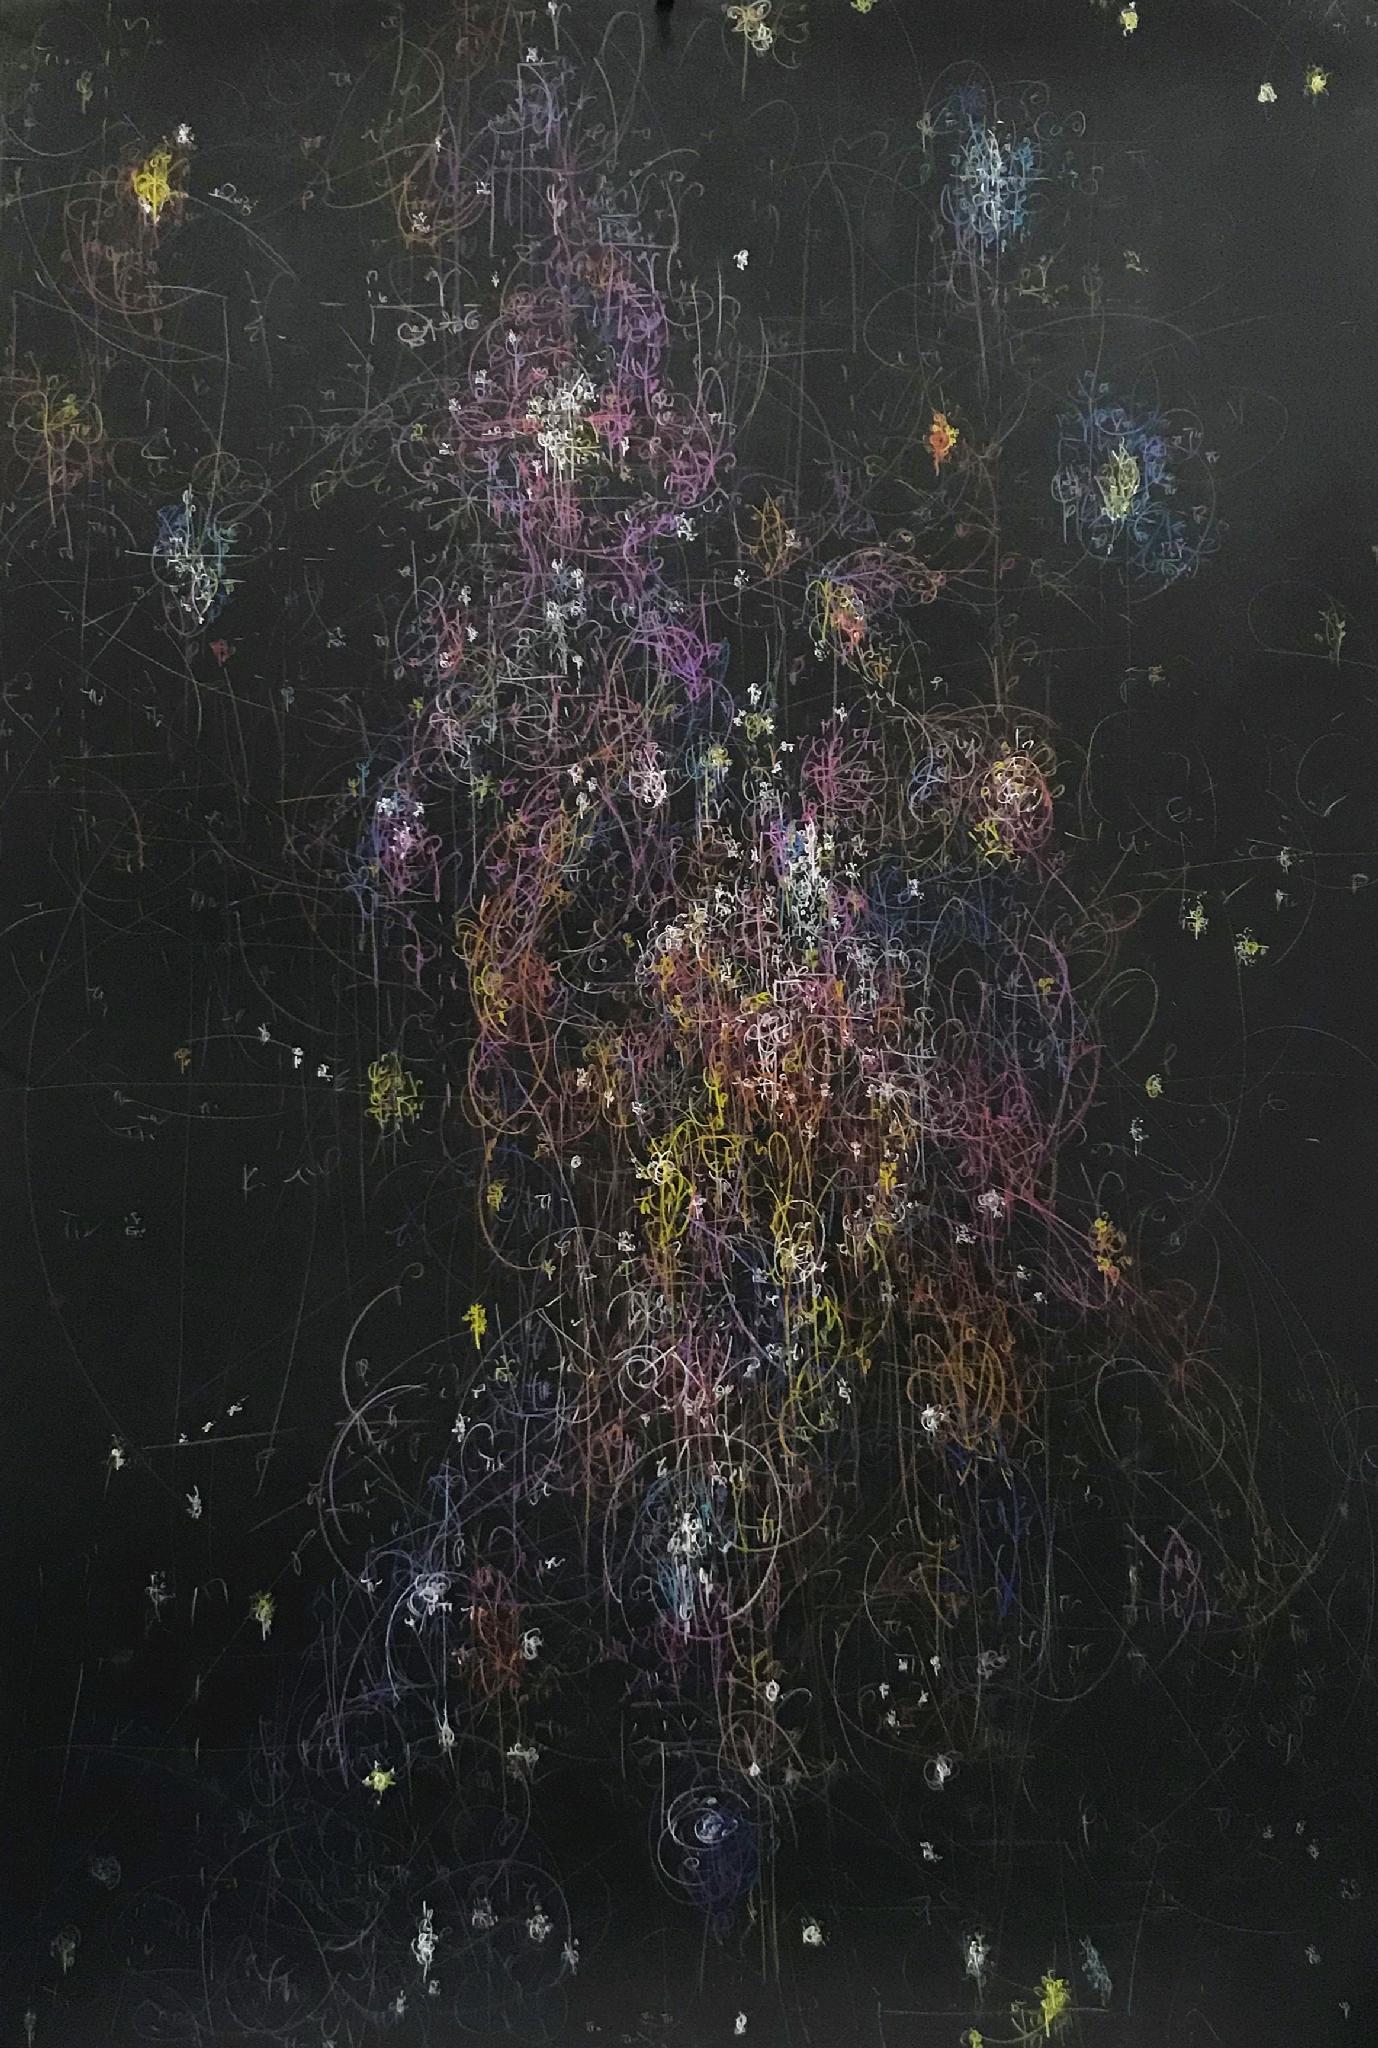 Kysa Johnson Abstract Painting - blow up 228 - the long goodbye - subatomic decay patterns and the Orion Nebula